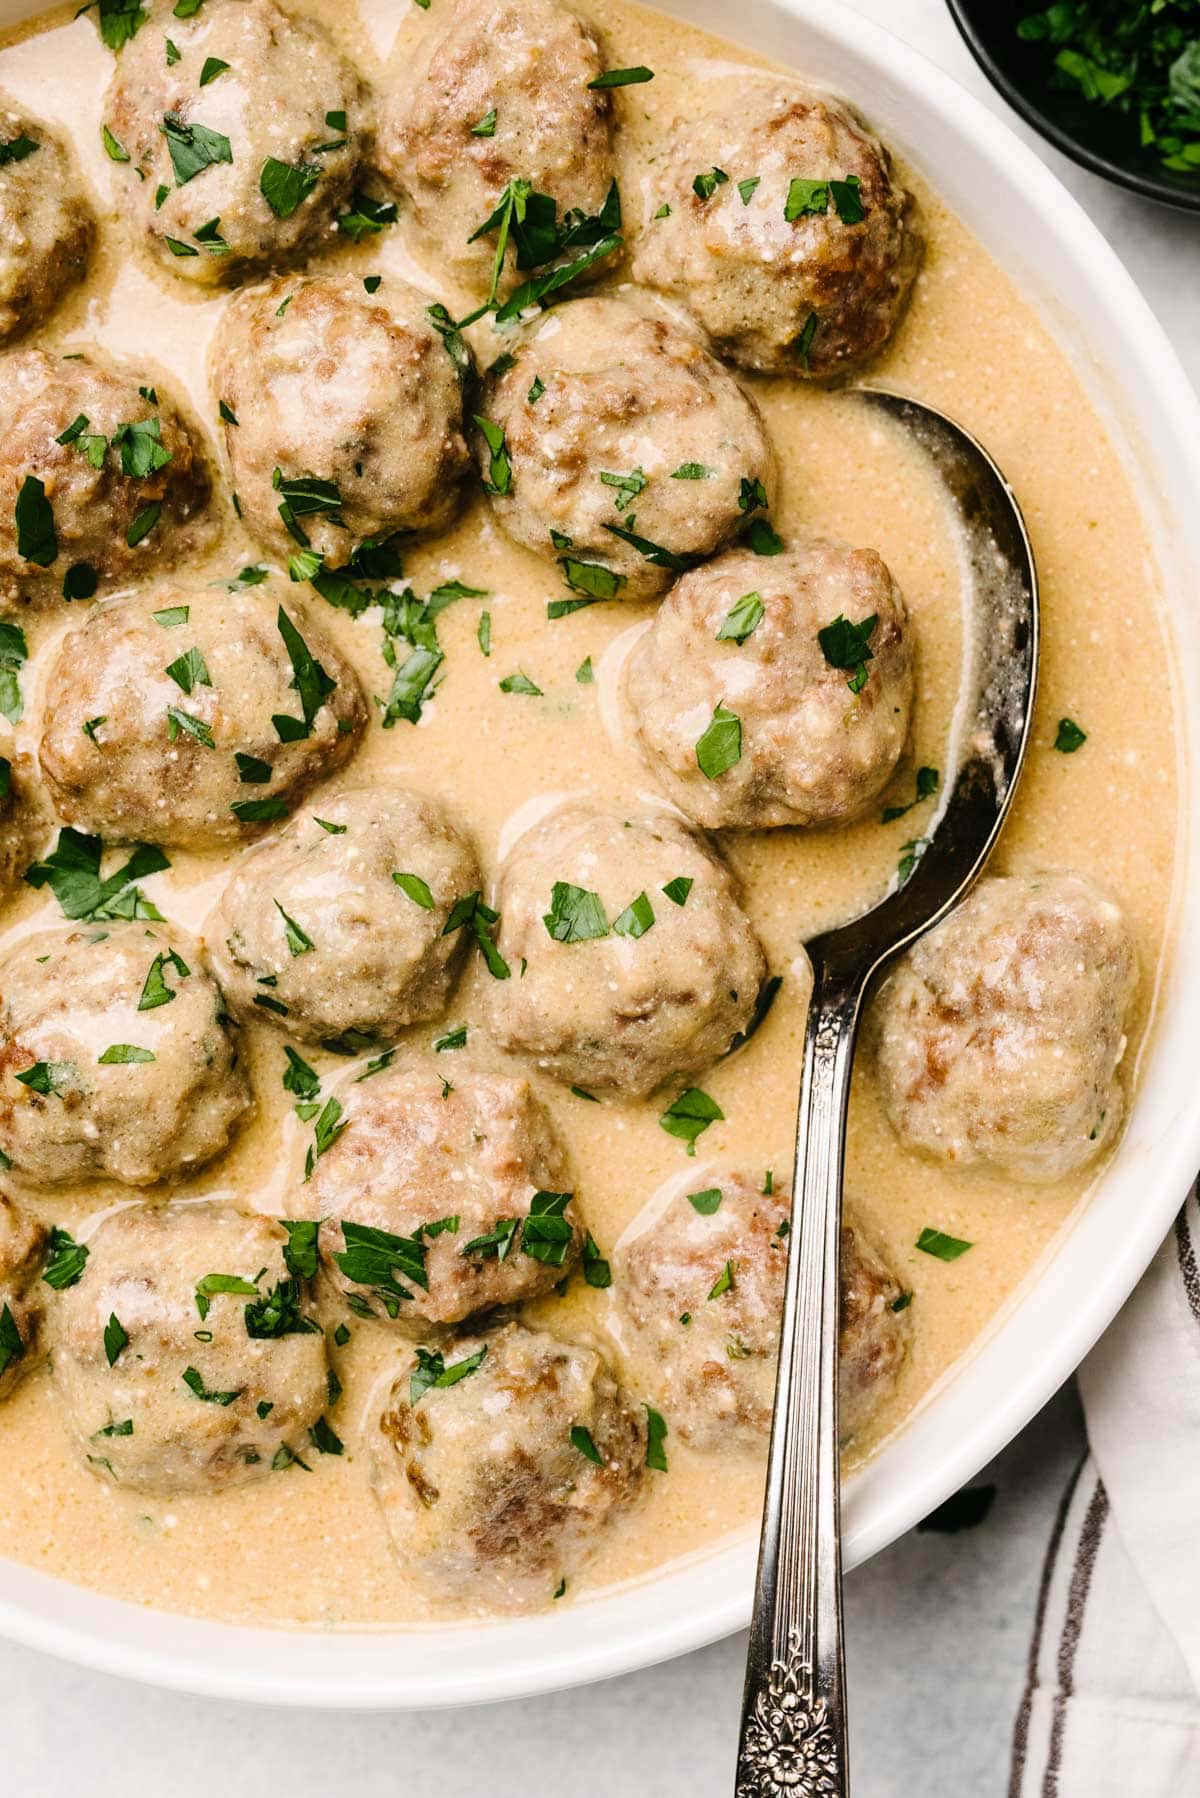 A spoon tucked into a serving bowl filled with Swedish meatballs and a creamy sauce.